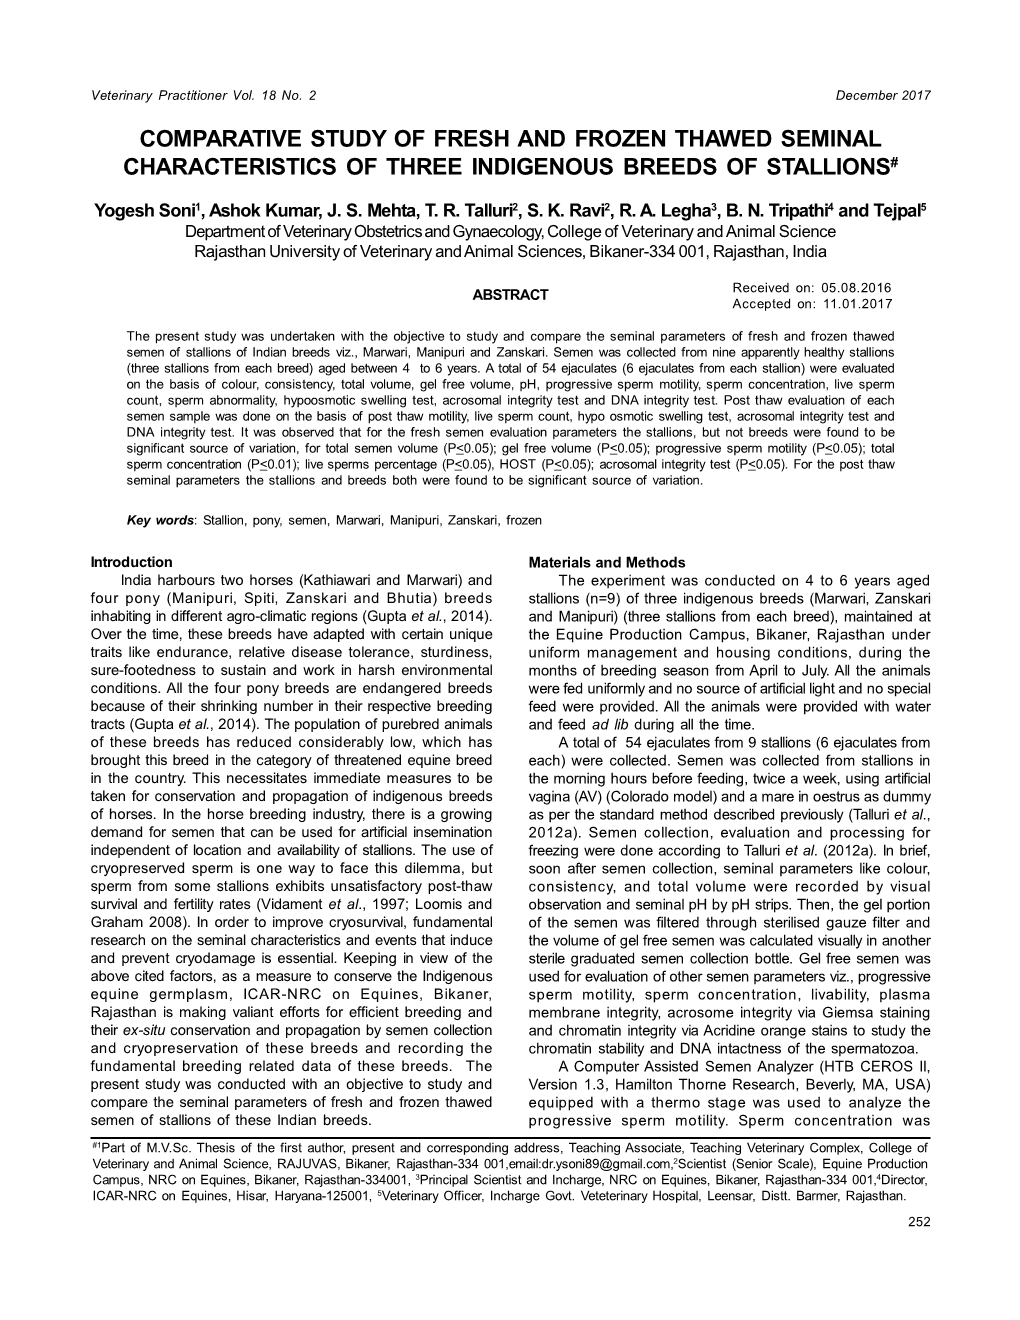 Comparative Study of Fresh and Frozen Thawed Seminal Characteristics of Three Indigenous Breeds of Stallions